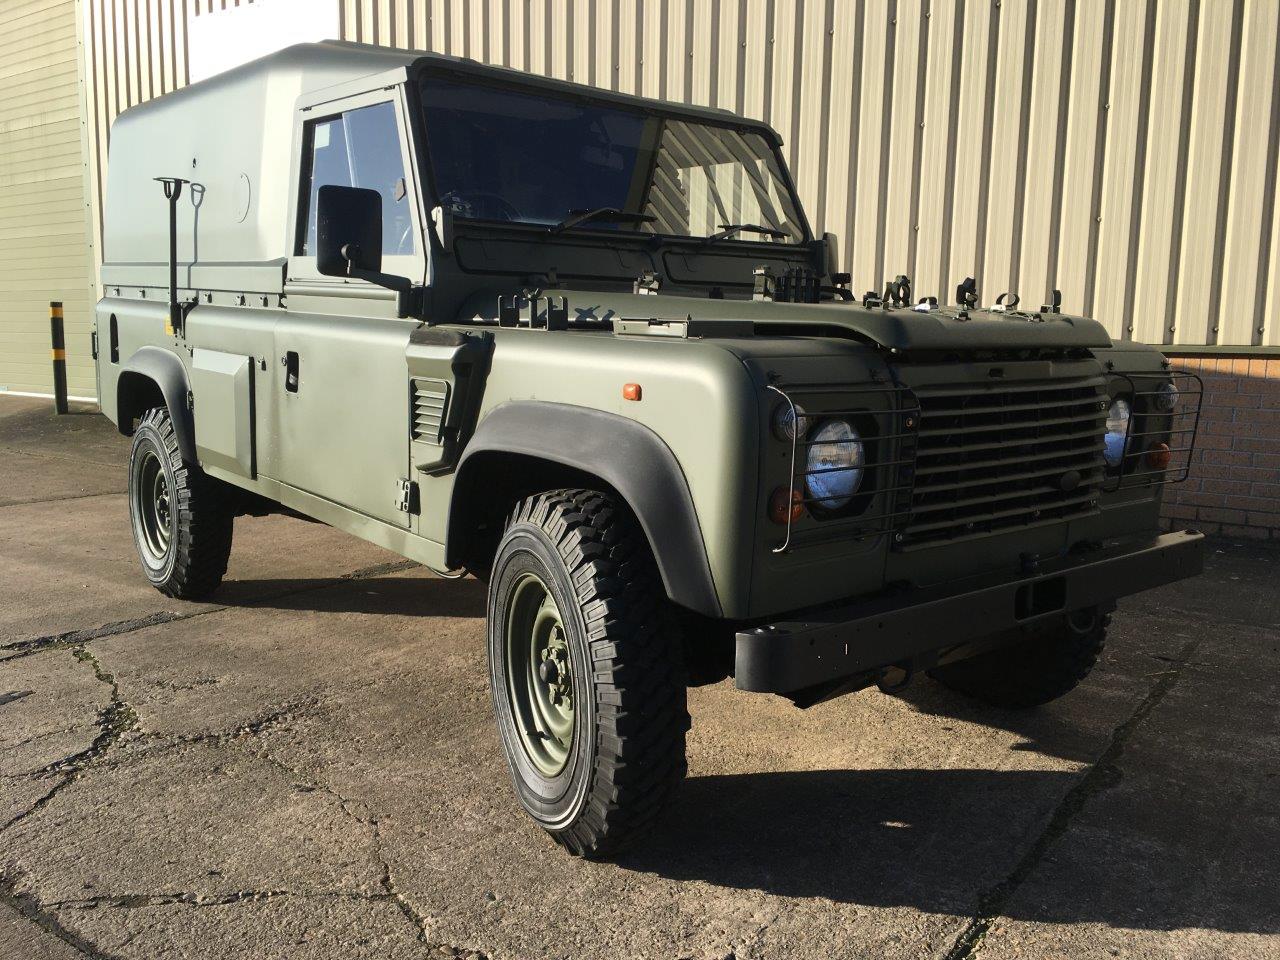 Land Rover Defender 110 Wolf  RHD Hard Top (Remus) - ex military vehicles for sale, mod surplus